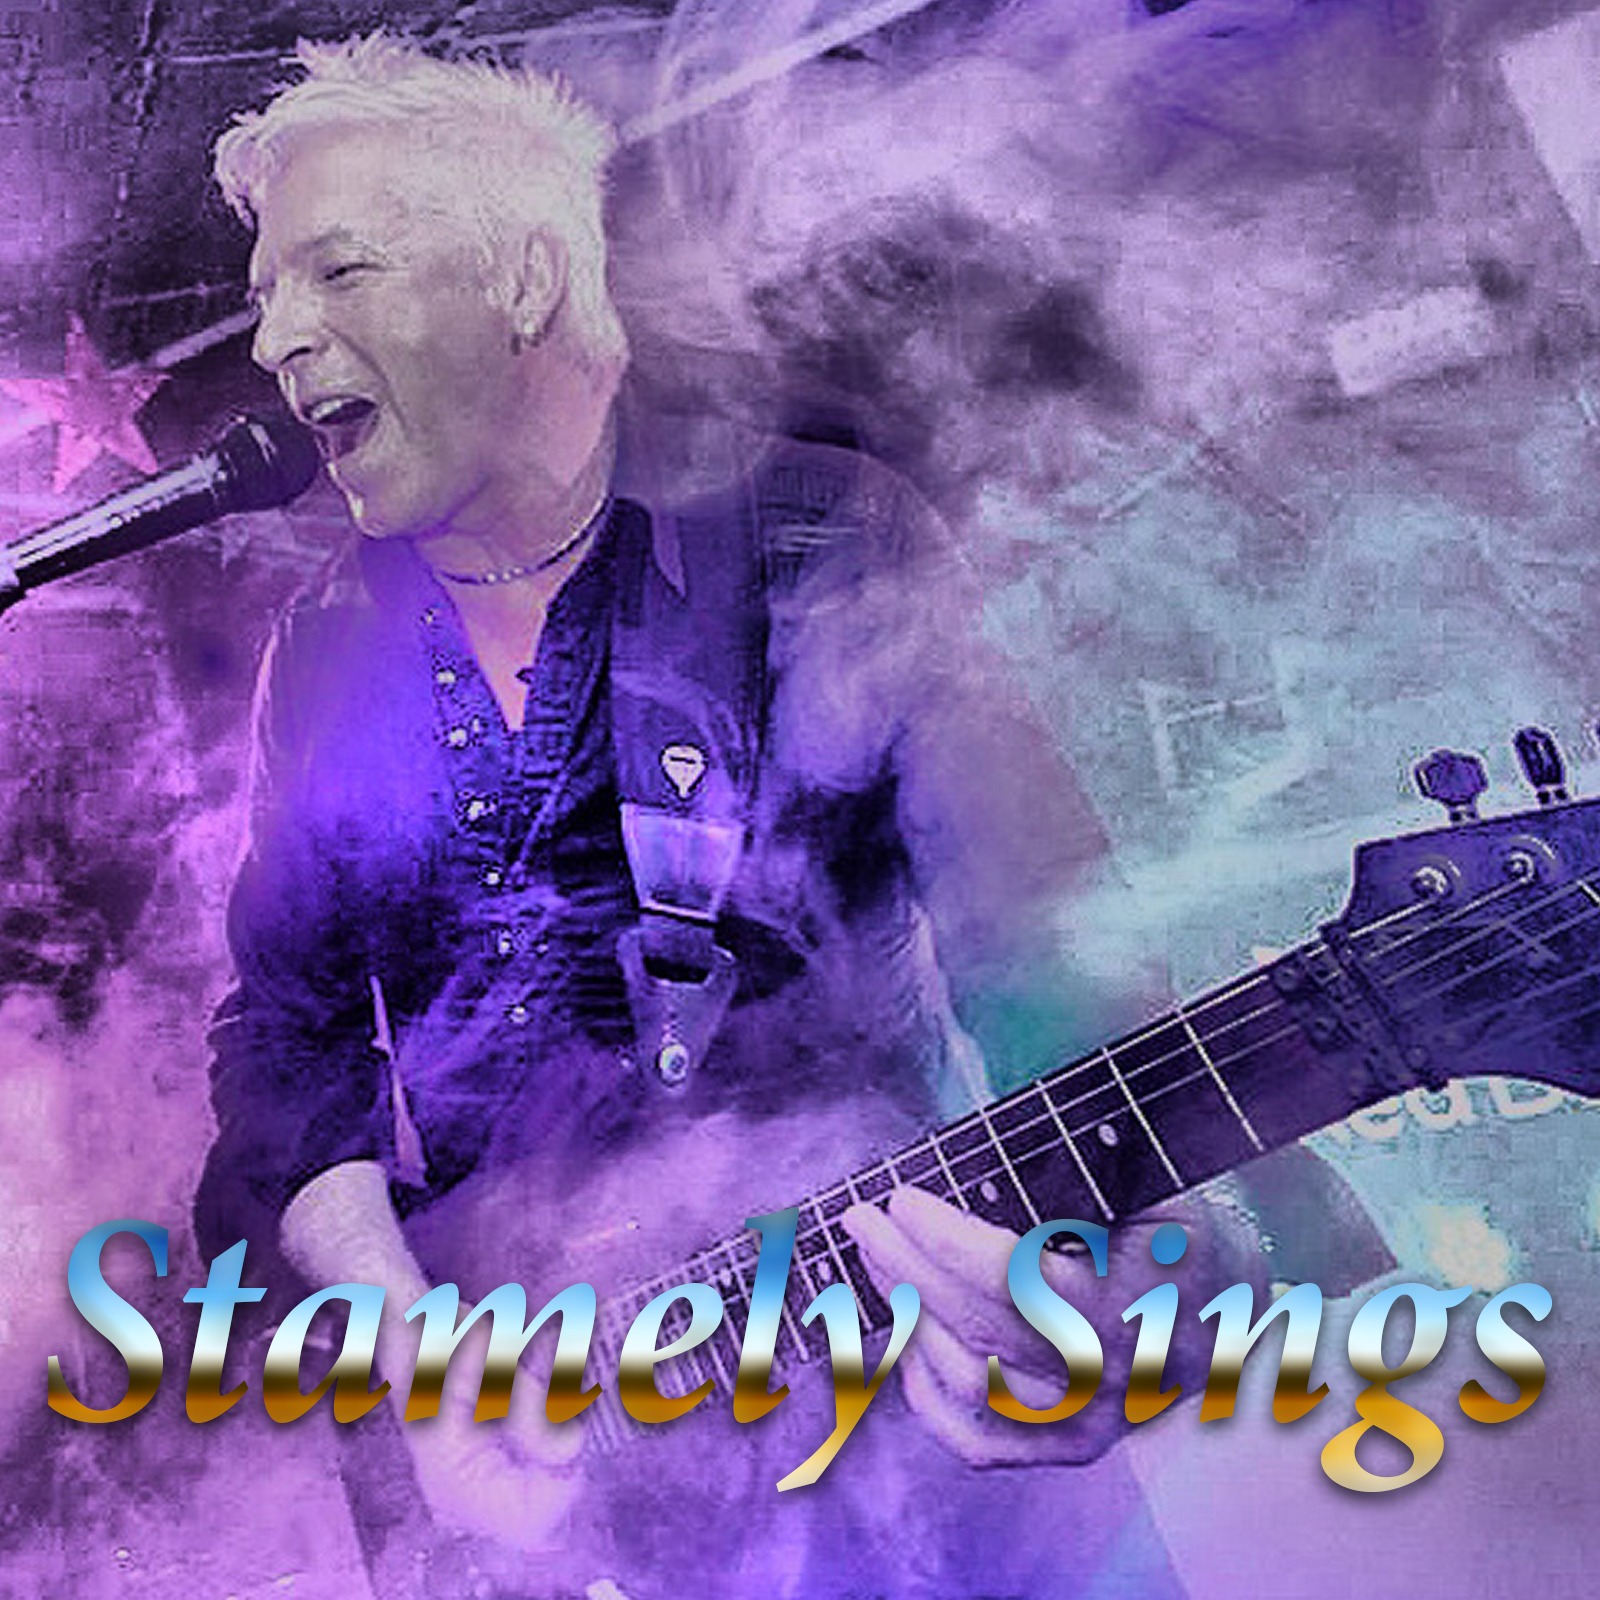 High-Energy Funk to Reinvigorate the Soul: Kiril Peltekov Stamely Releases New Album ‘Stamely Sings’